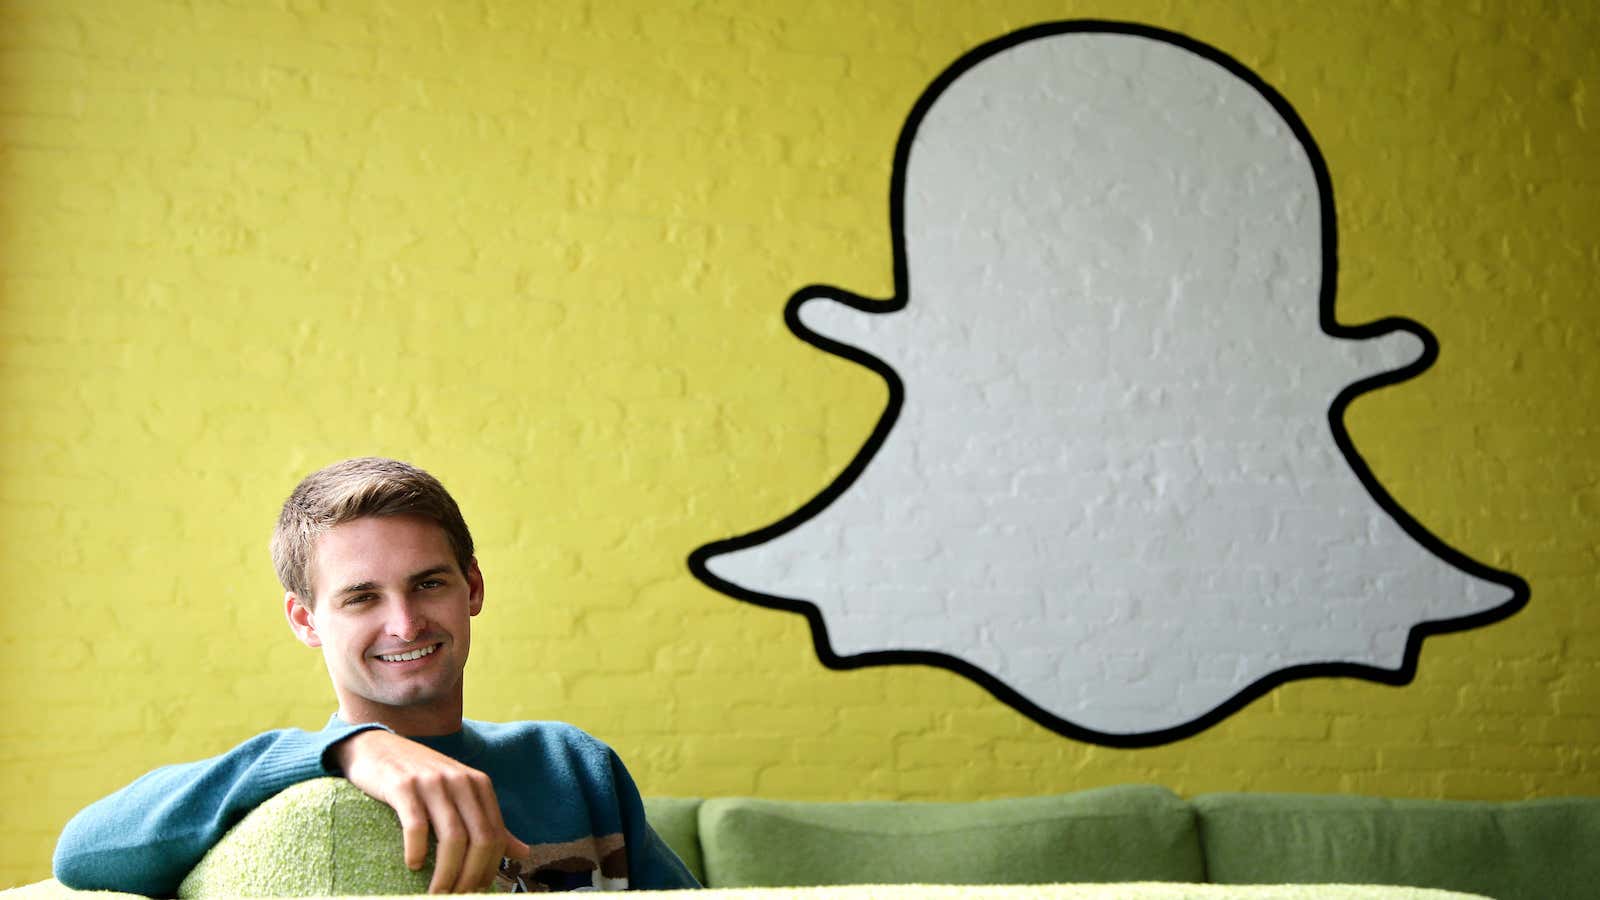 Snapchat just closed a big funding round.